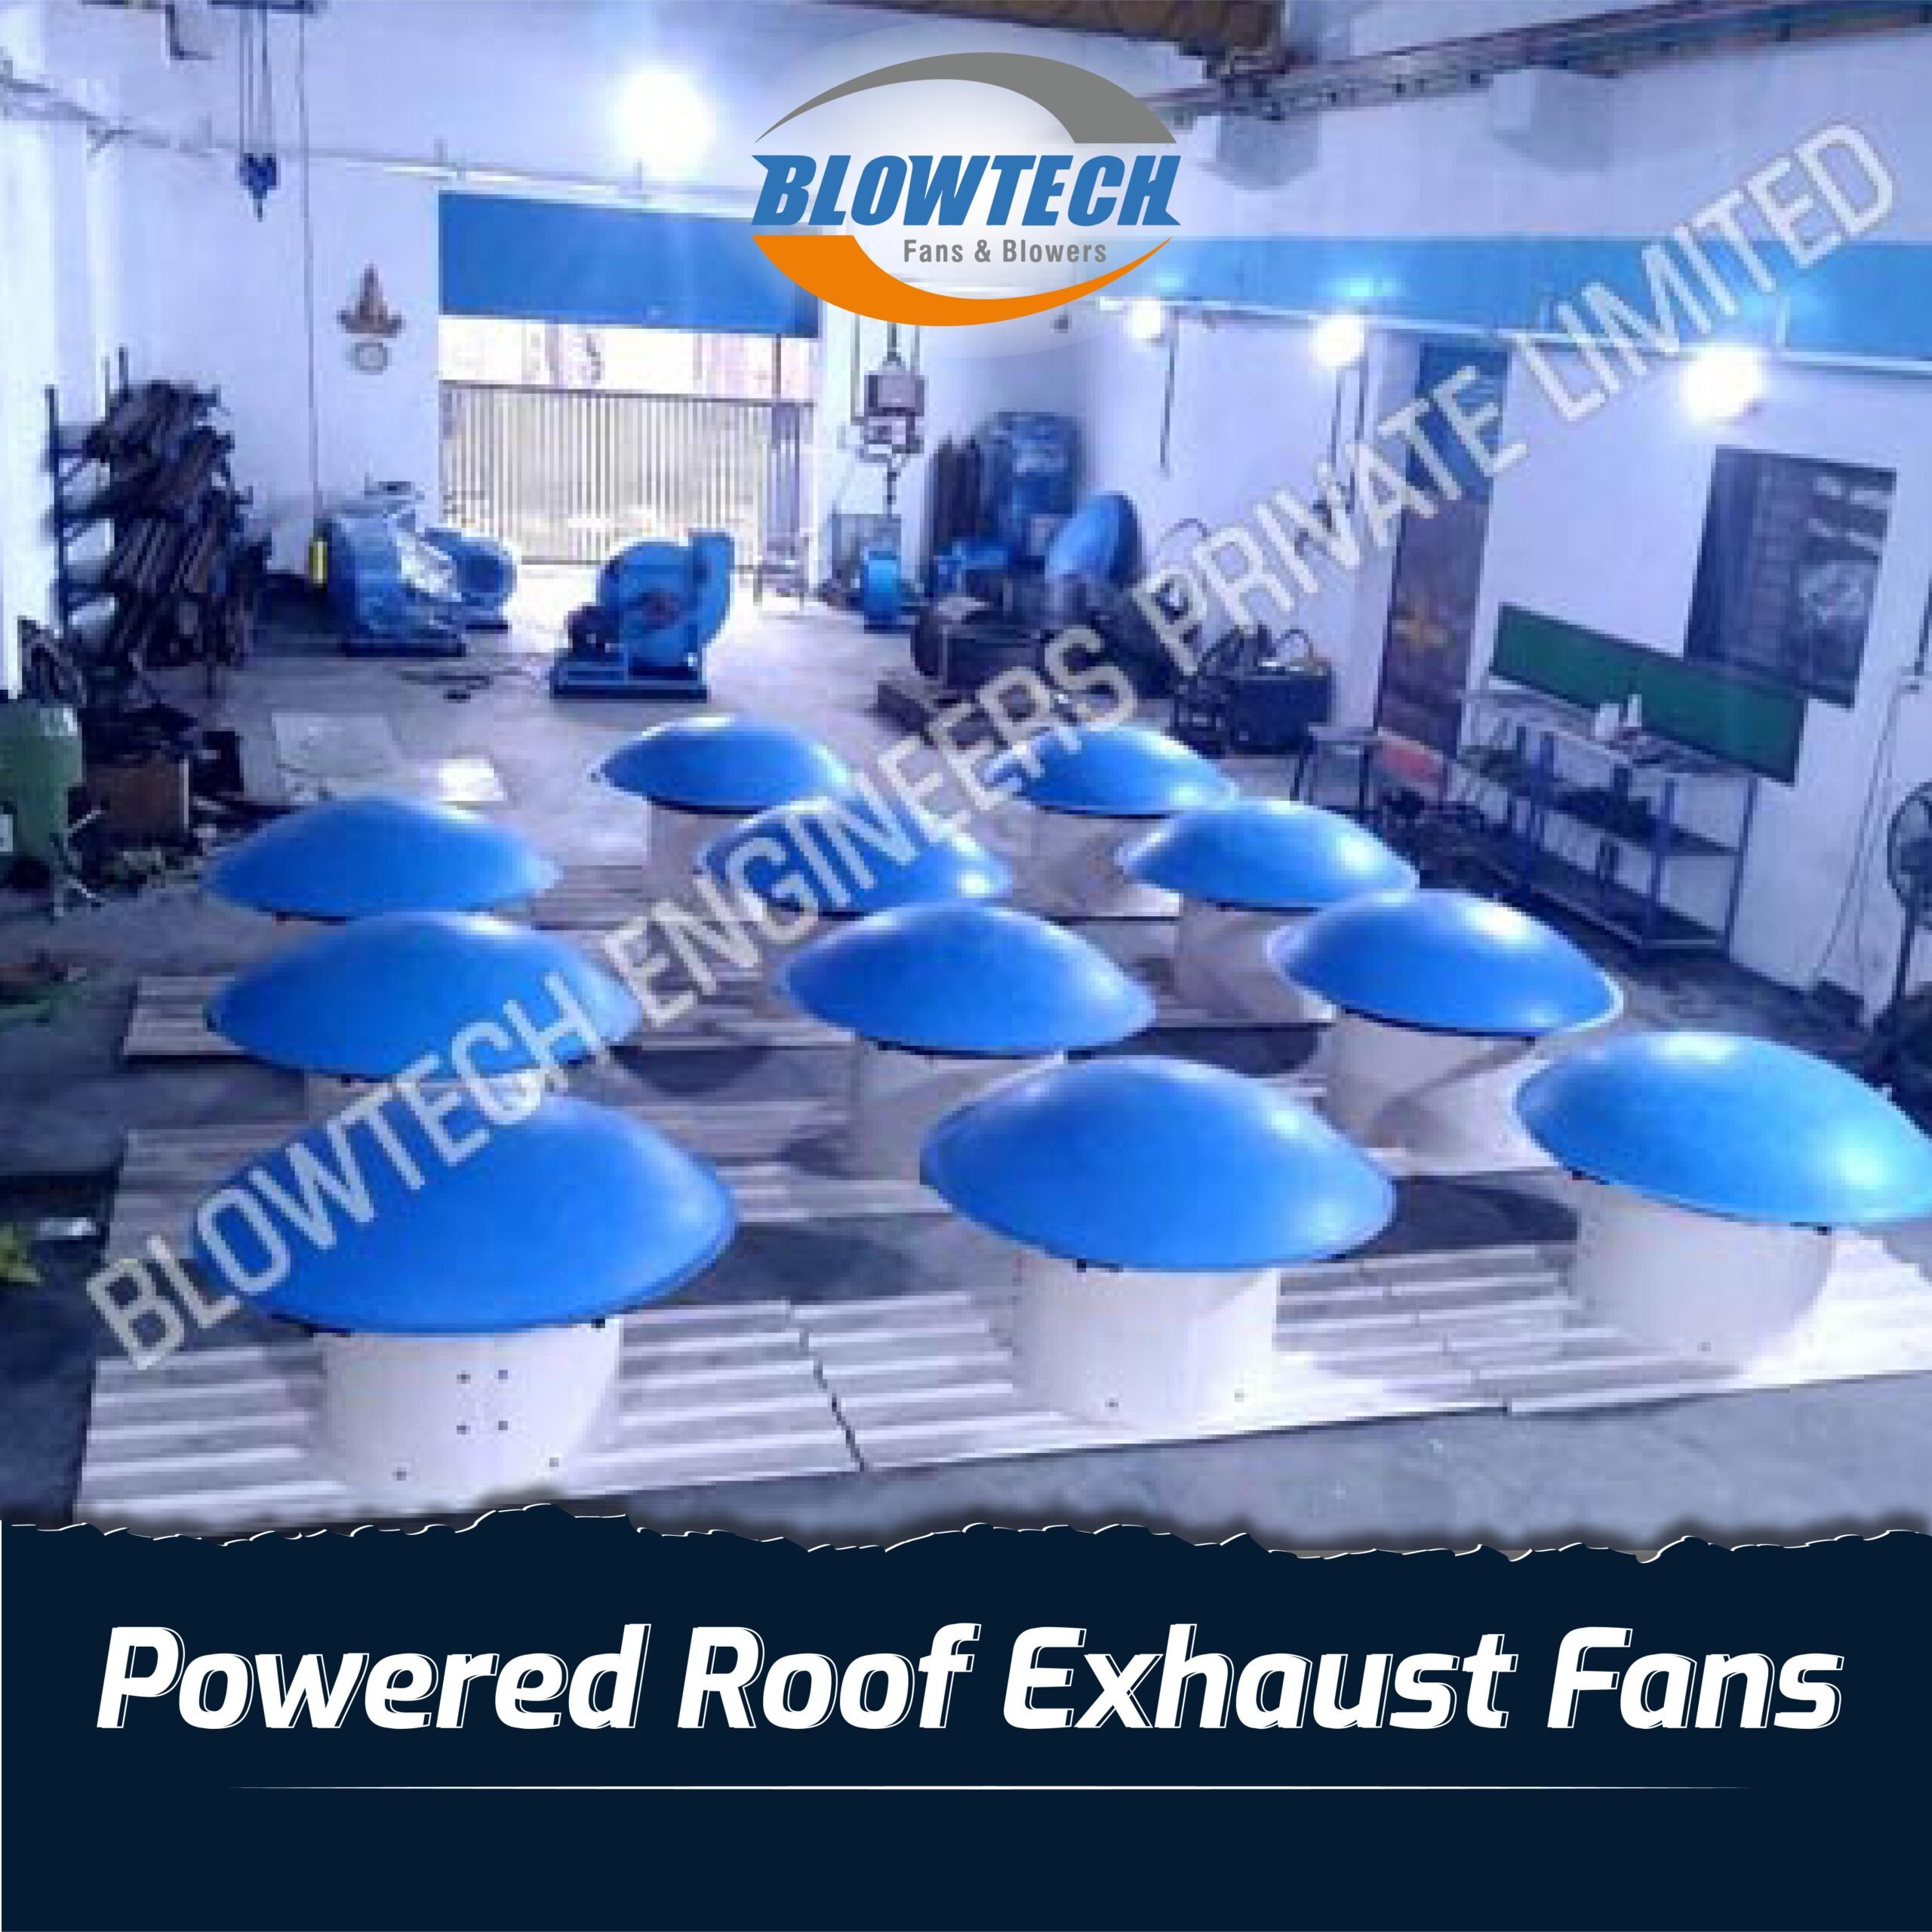 Powered Roof Exhaust Fans  manufacturer, supplier and exporter in Mumbai, India